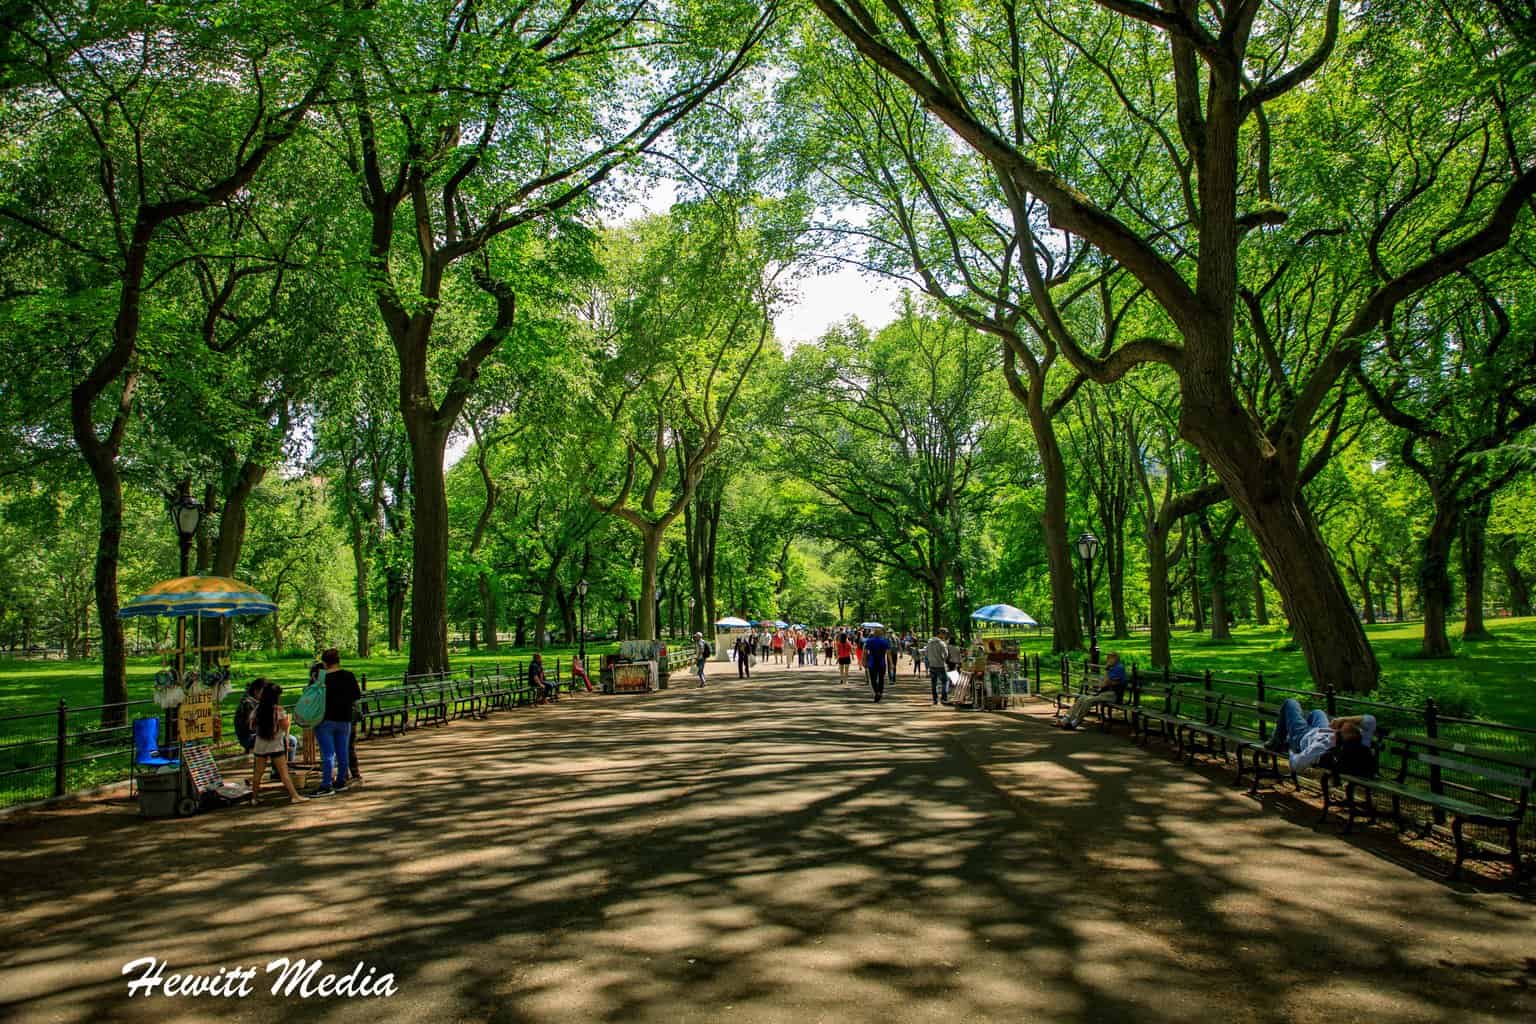 Things to See in the United States Central Park